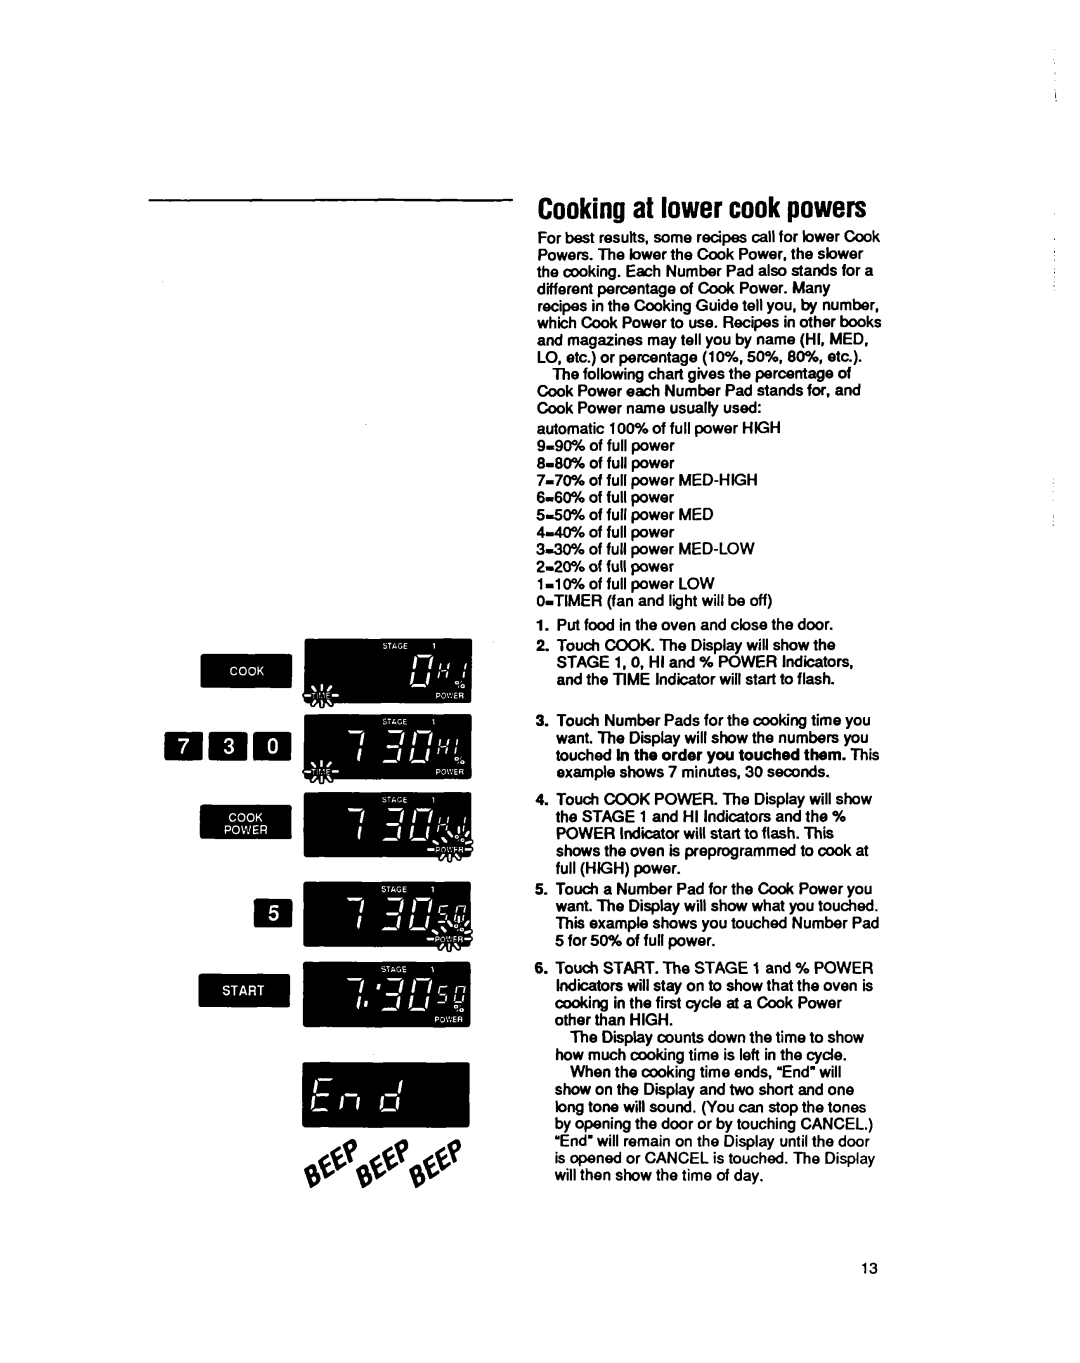 Whirlpool MS3080XY user manual Cookingat lower cookpowers 